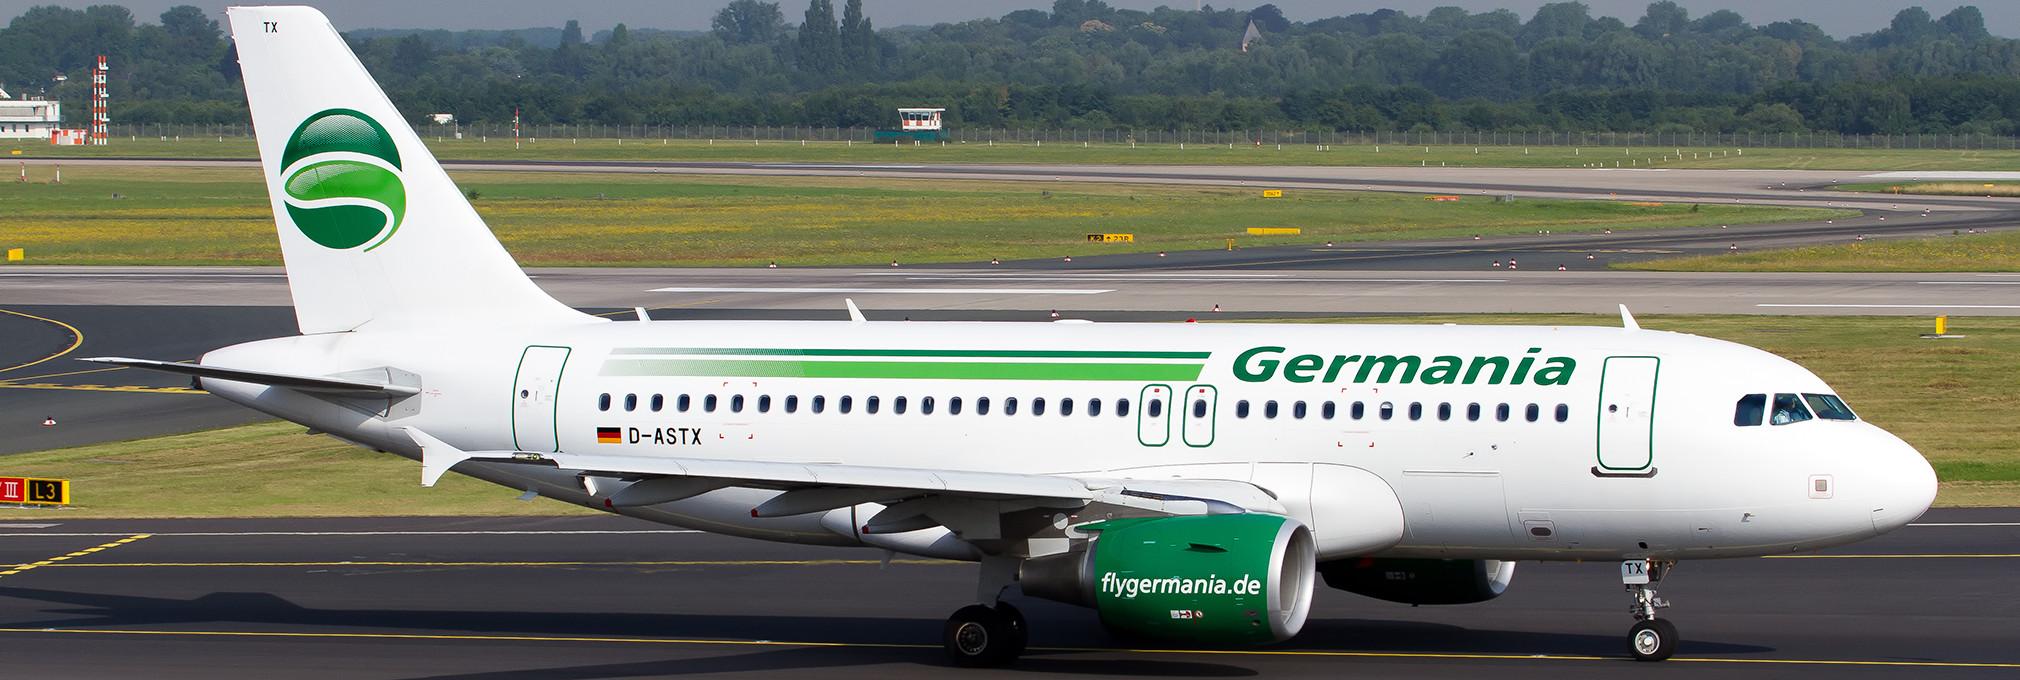 germania-airlines